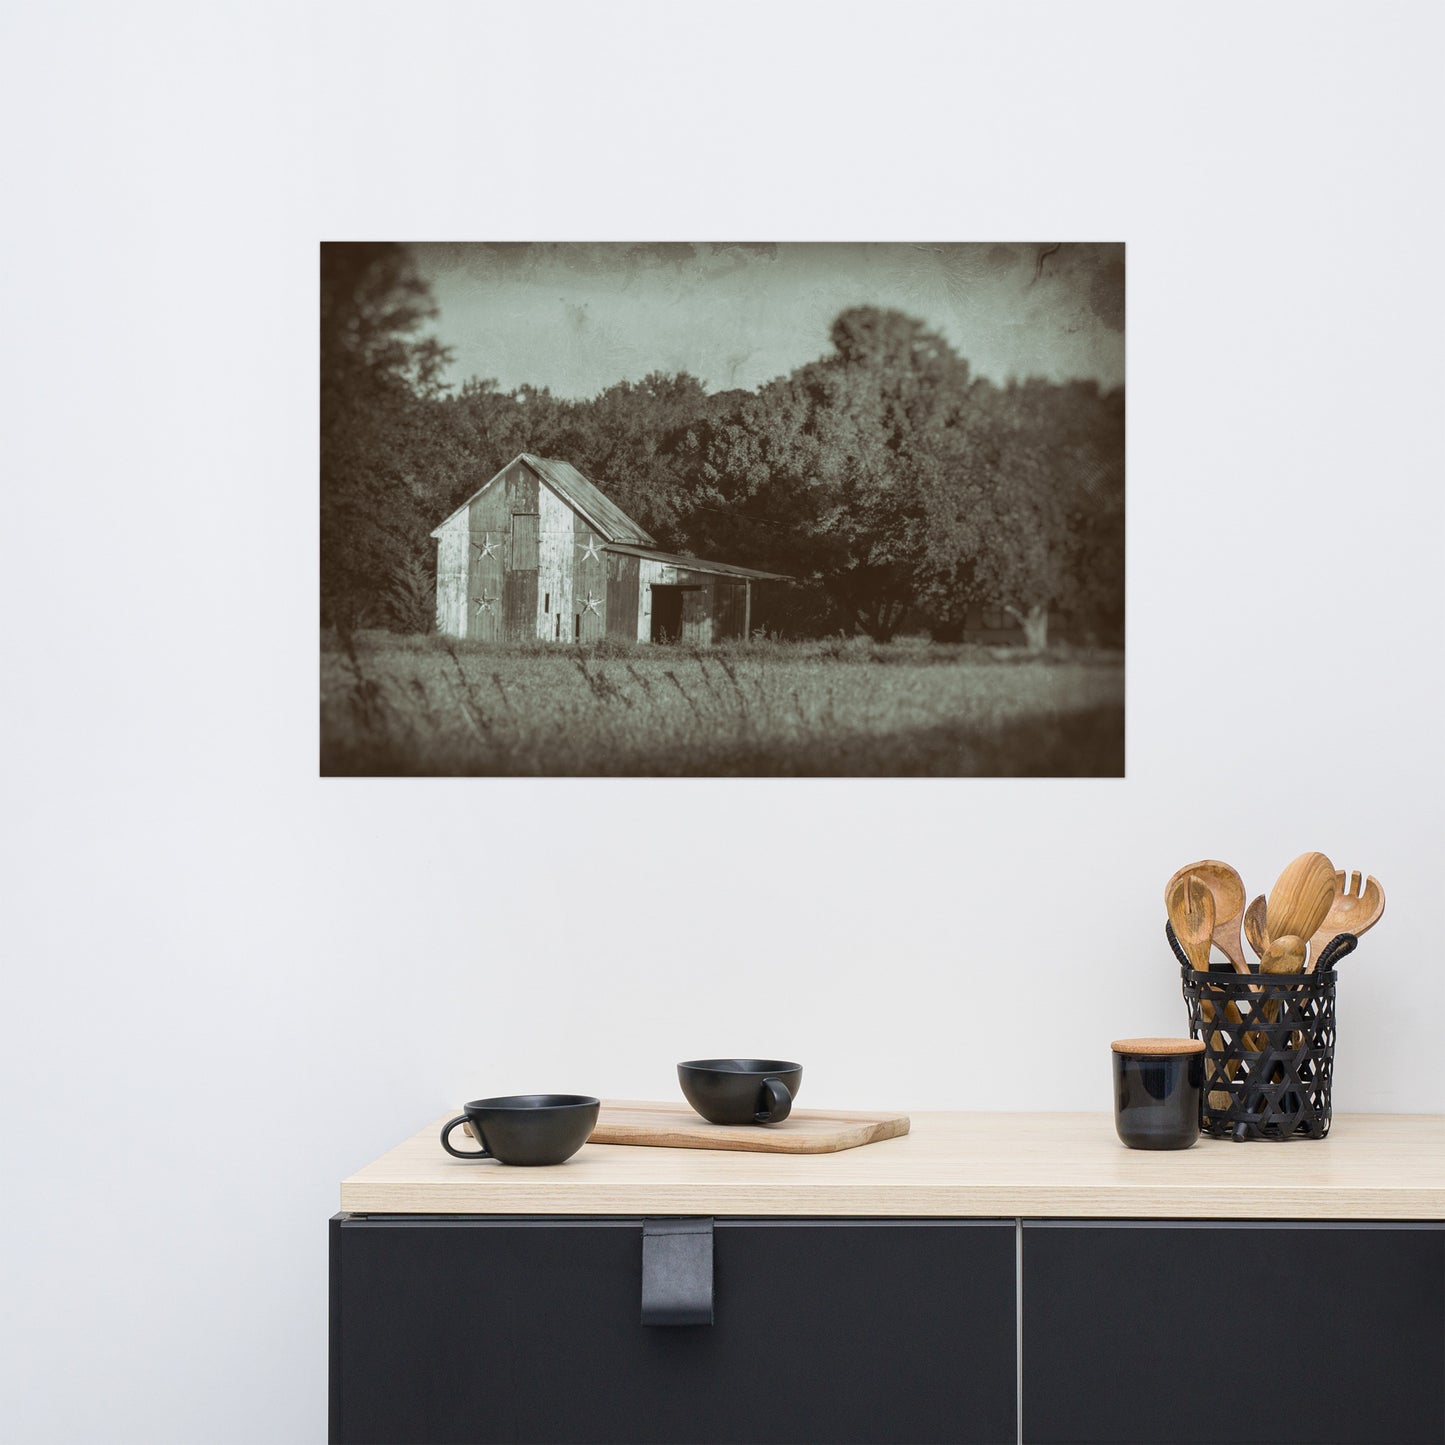 Patriotic Barn in Field Vintage Black and White Landscape Photo Loose Wall Art Prints